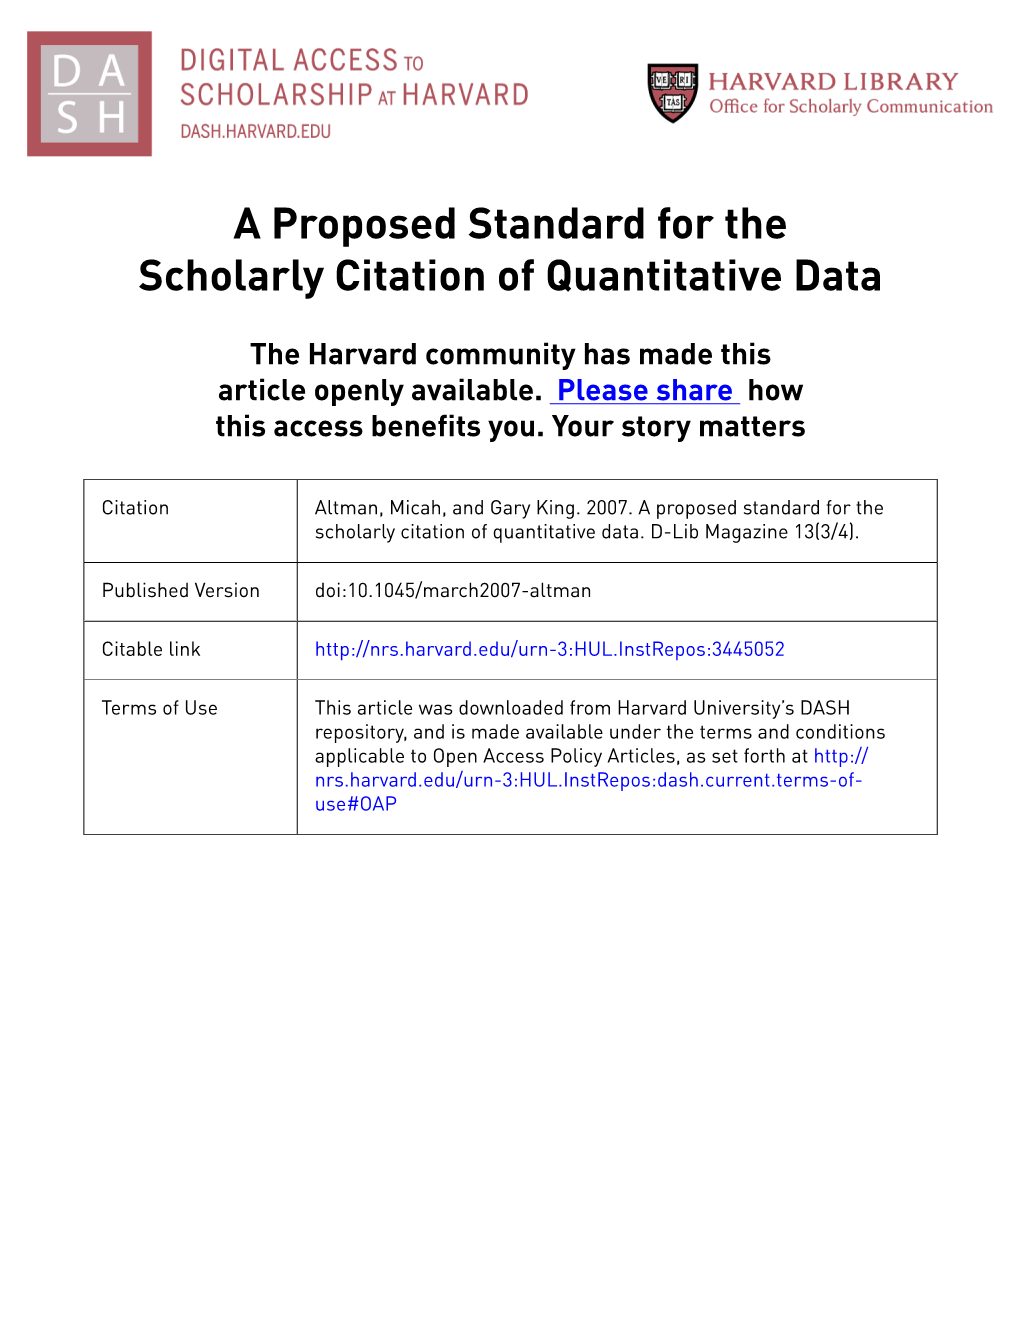 A Proposed Standard for the Scholarly Citation of Quantitative Data